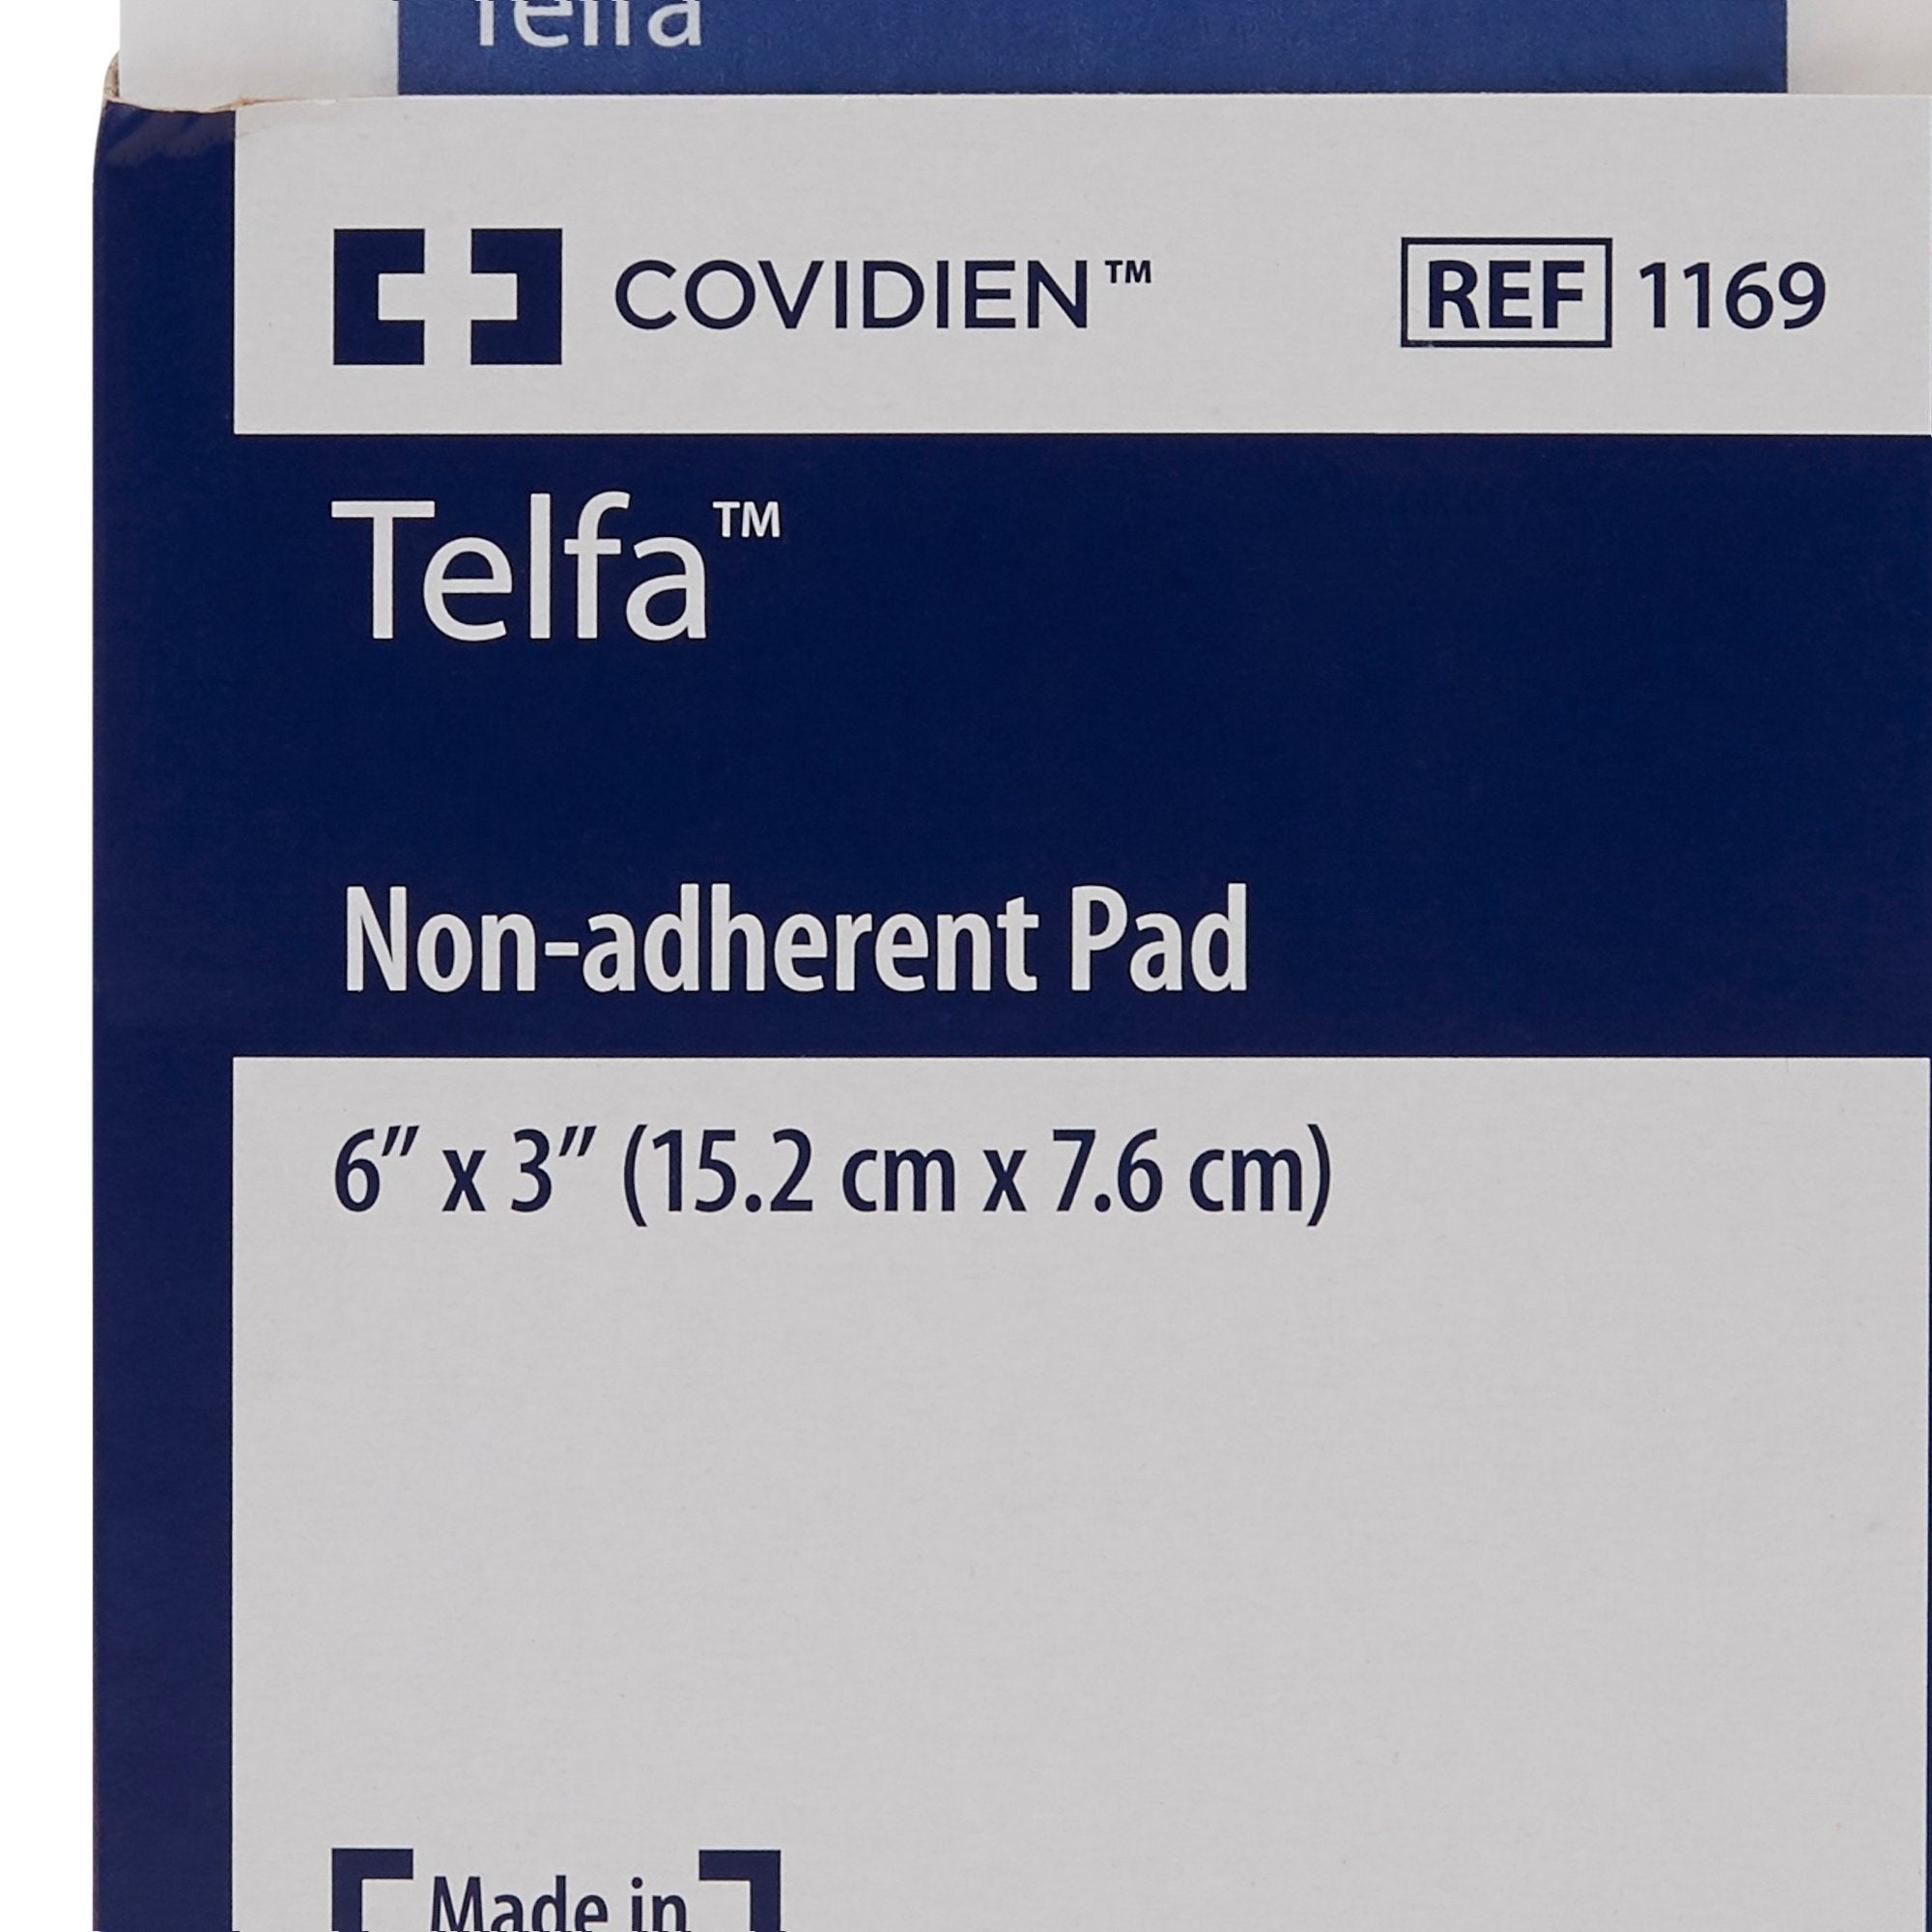 Telfa™ Ouchless Nonadherent Dressing, 3 x 6 Inch (50 Units)